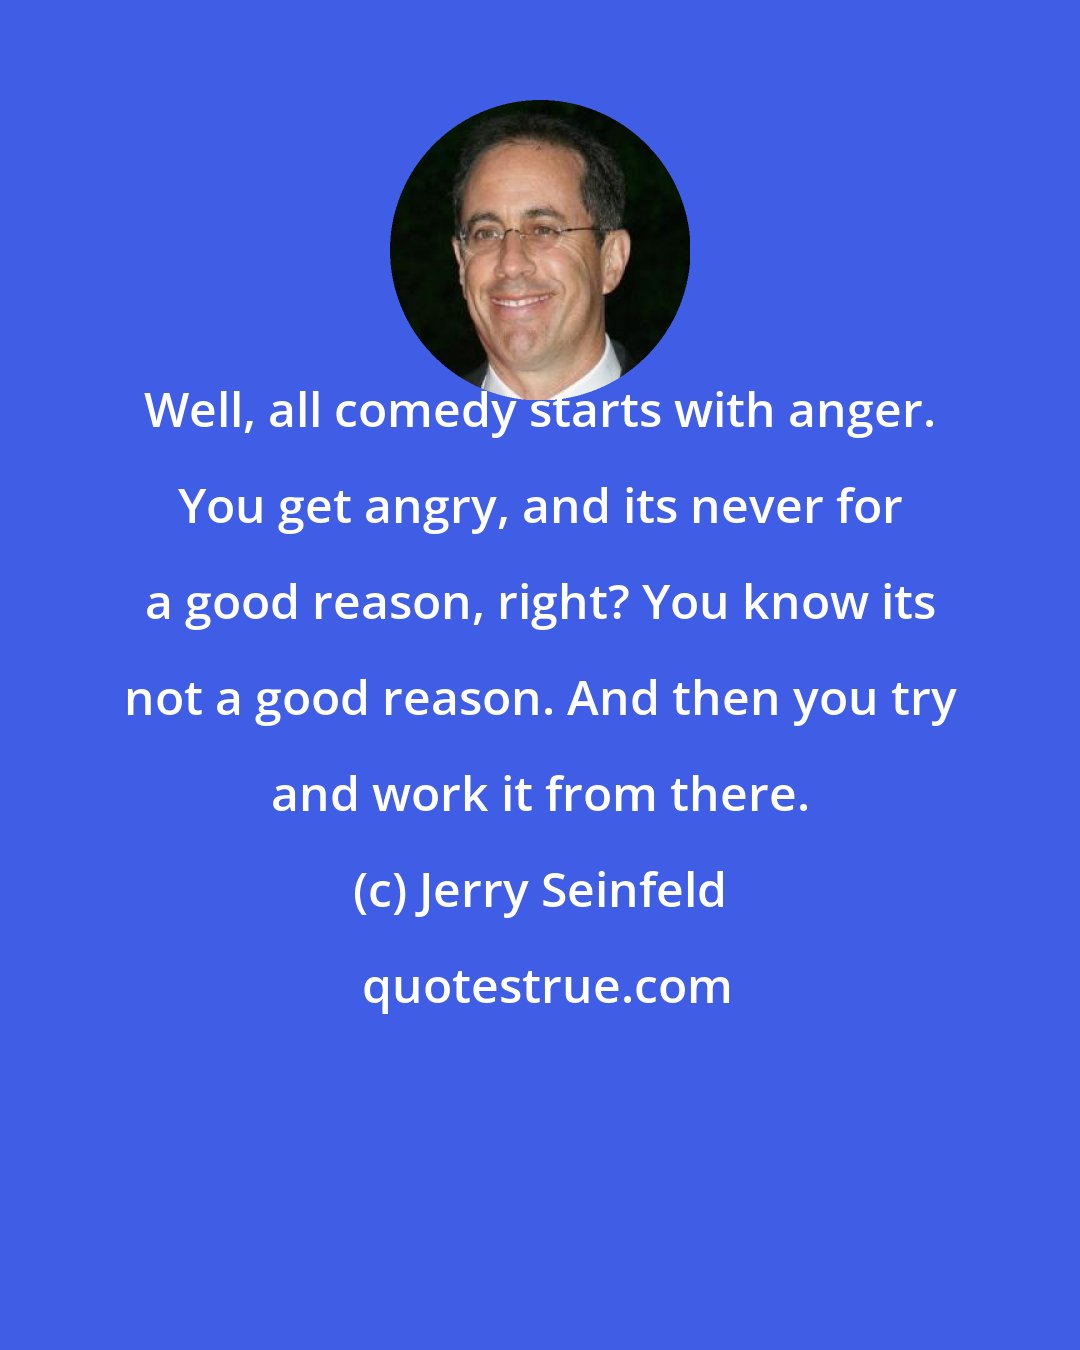 Jerry Seinfeld: Well, all comedy starts with anger. You get angry, and its never for a good reason, right? You know its not a good reason. And then you try and work it from there.